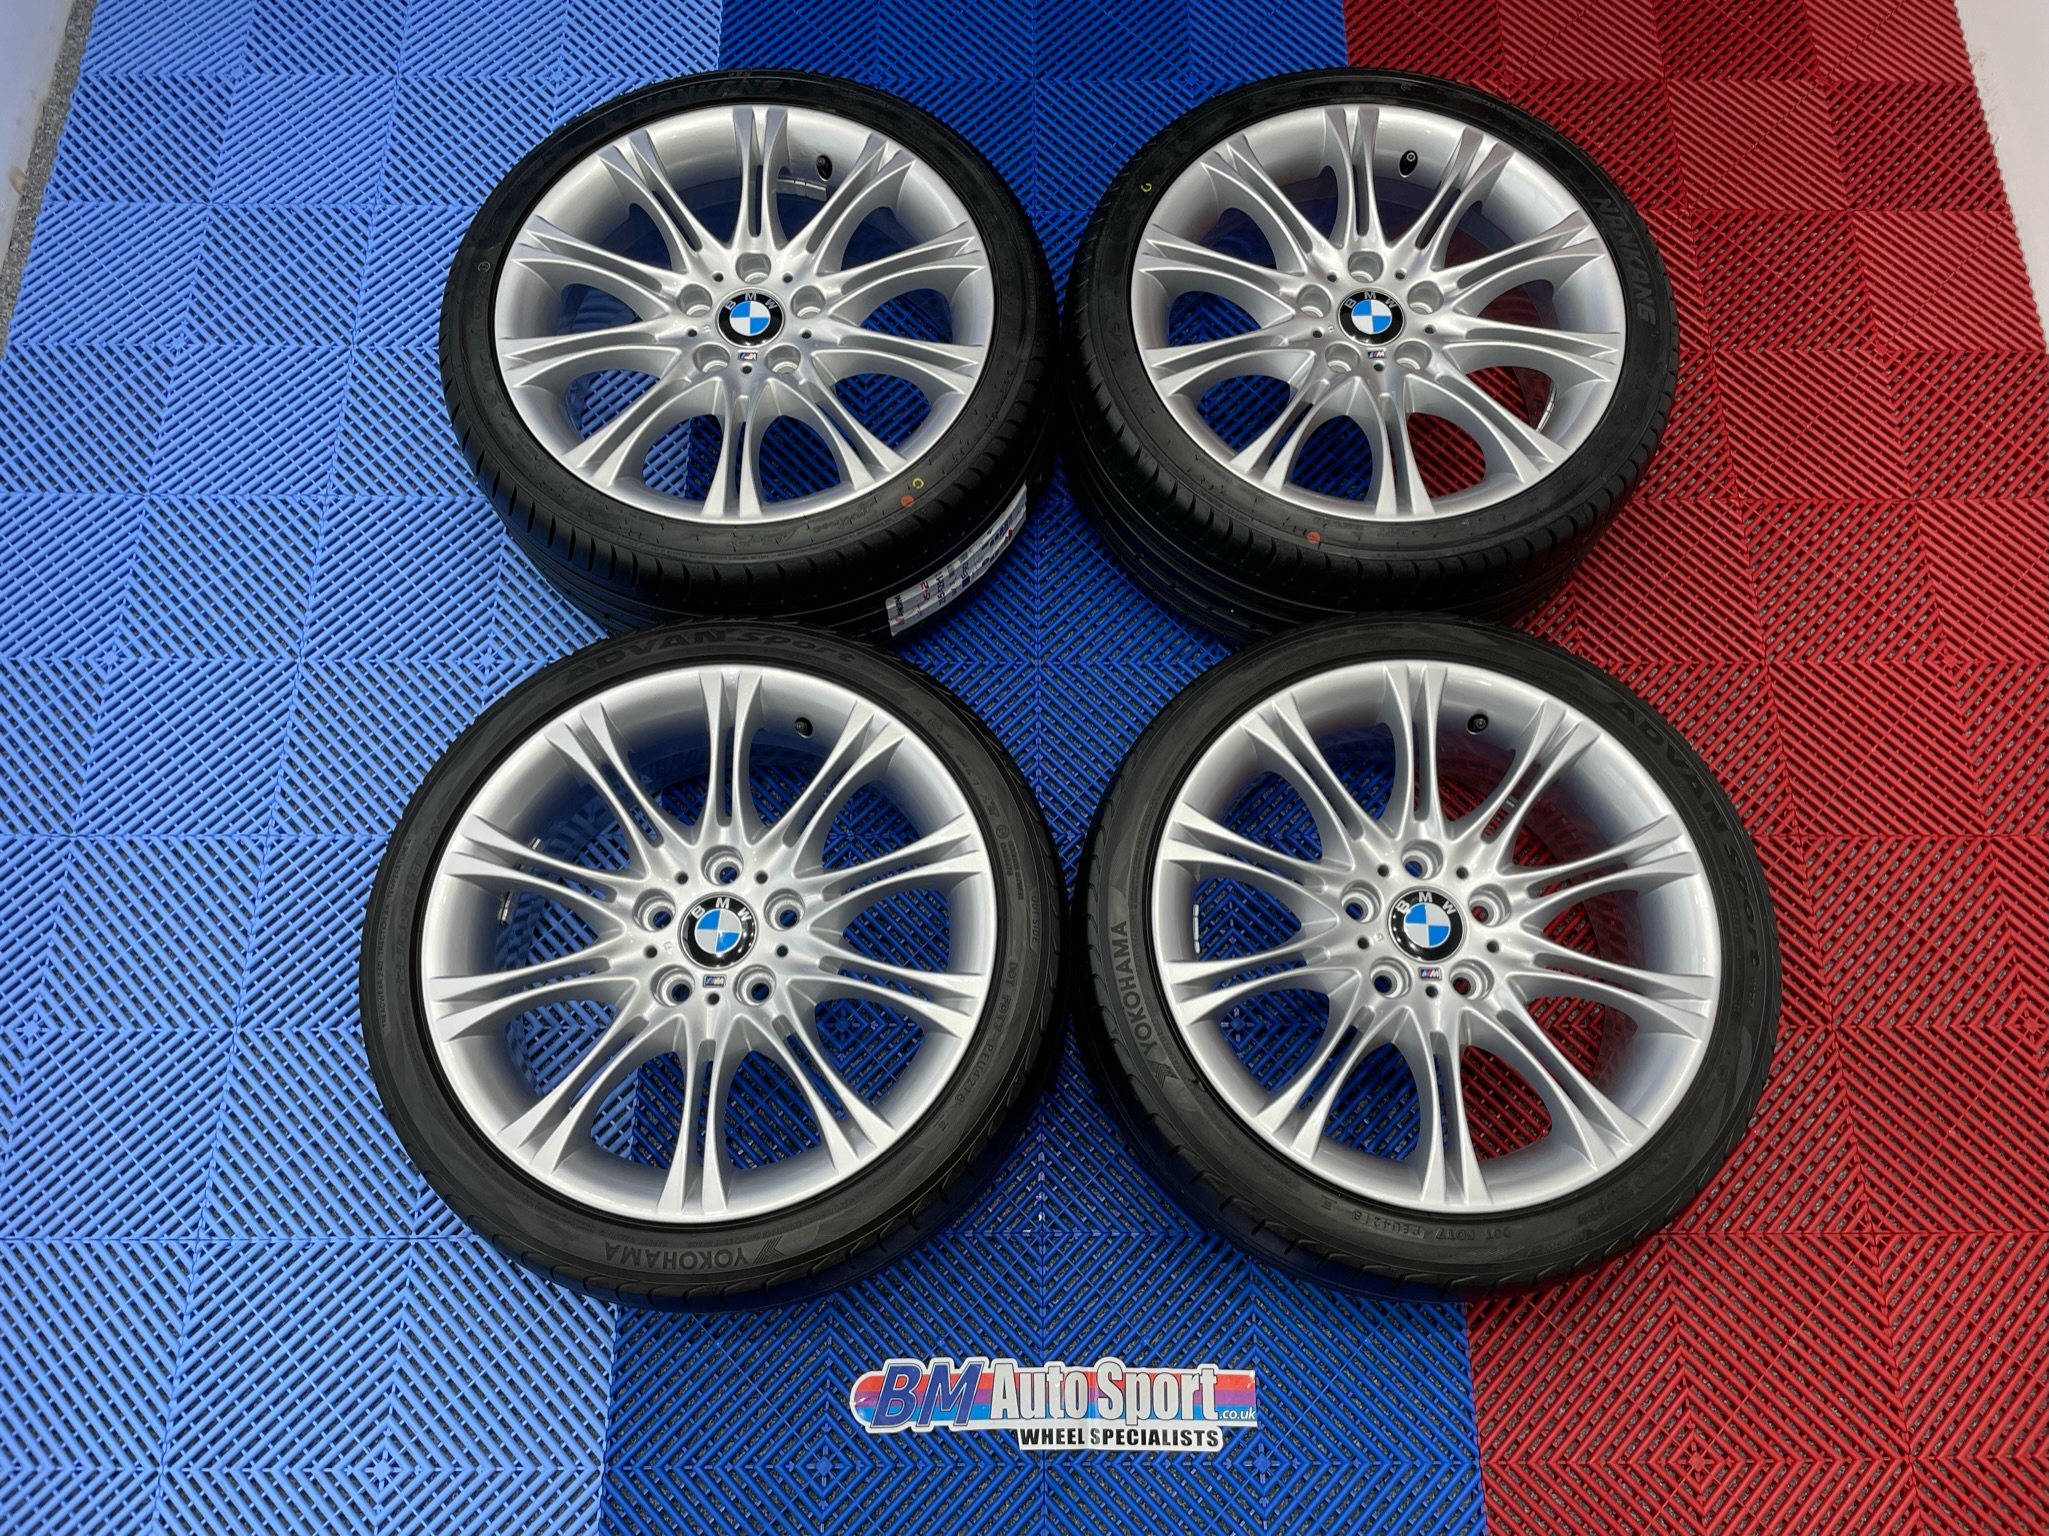 USED 18" GENUINE BMW STYLE 135 E46 MV2 SPORT ALLOY WHEELS,FULLY REFURBED,WIDE REAR INC GOOD TYRES (NEW REARS)